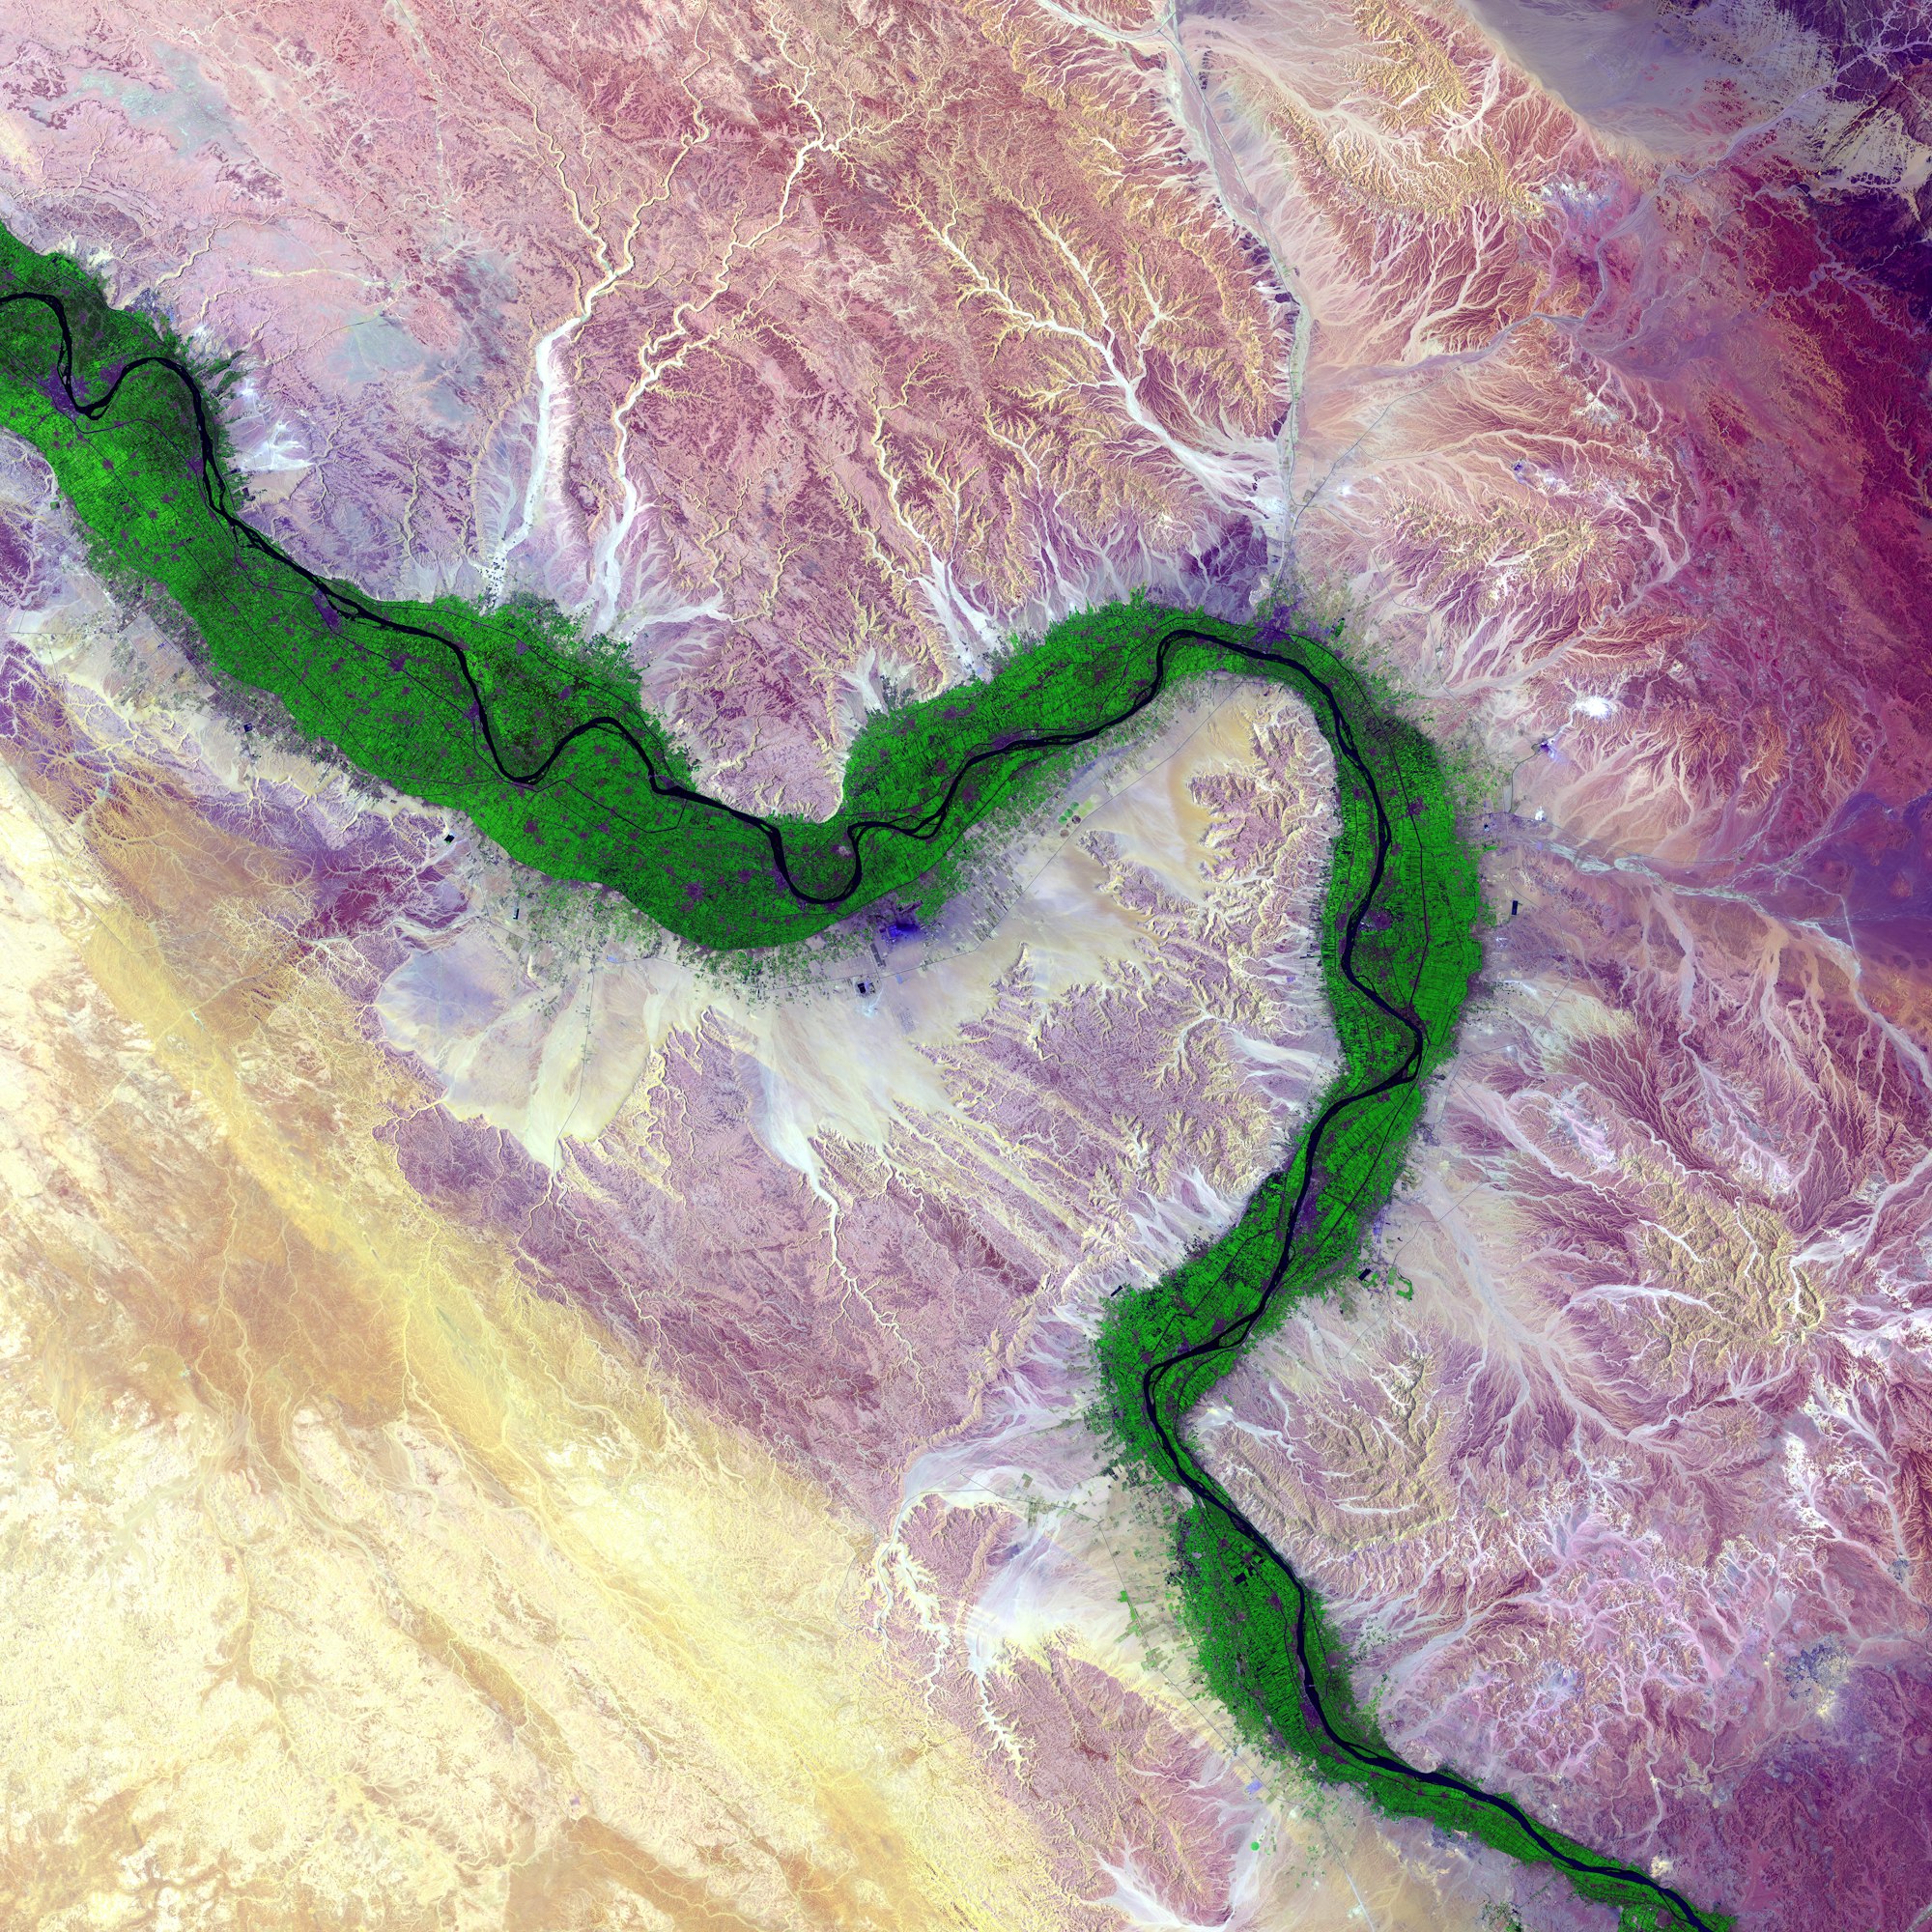 It is easy to see from this image why people have been drawn to the Nile River in Egypt for thousands of years. Green farmland marks a distinct boundary between the Nile floodplain and the surrounding harsh desert.